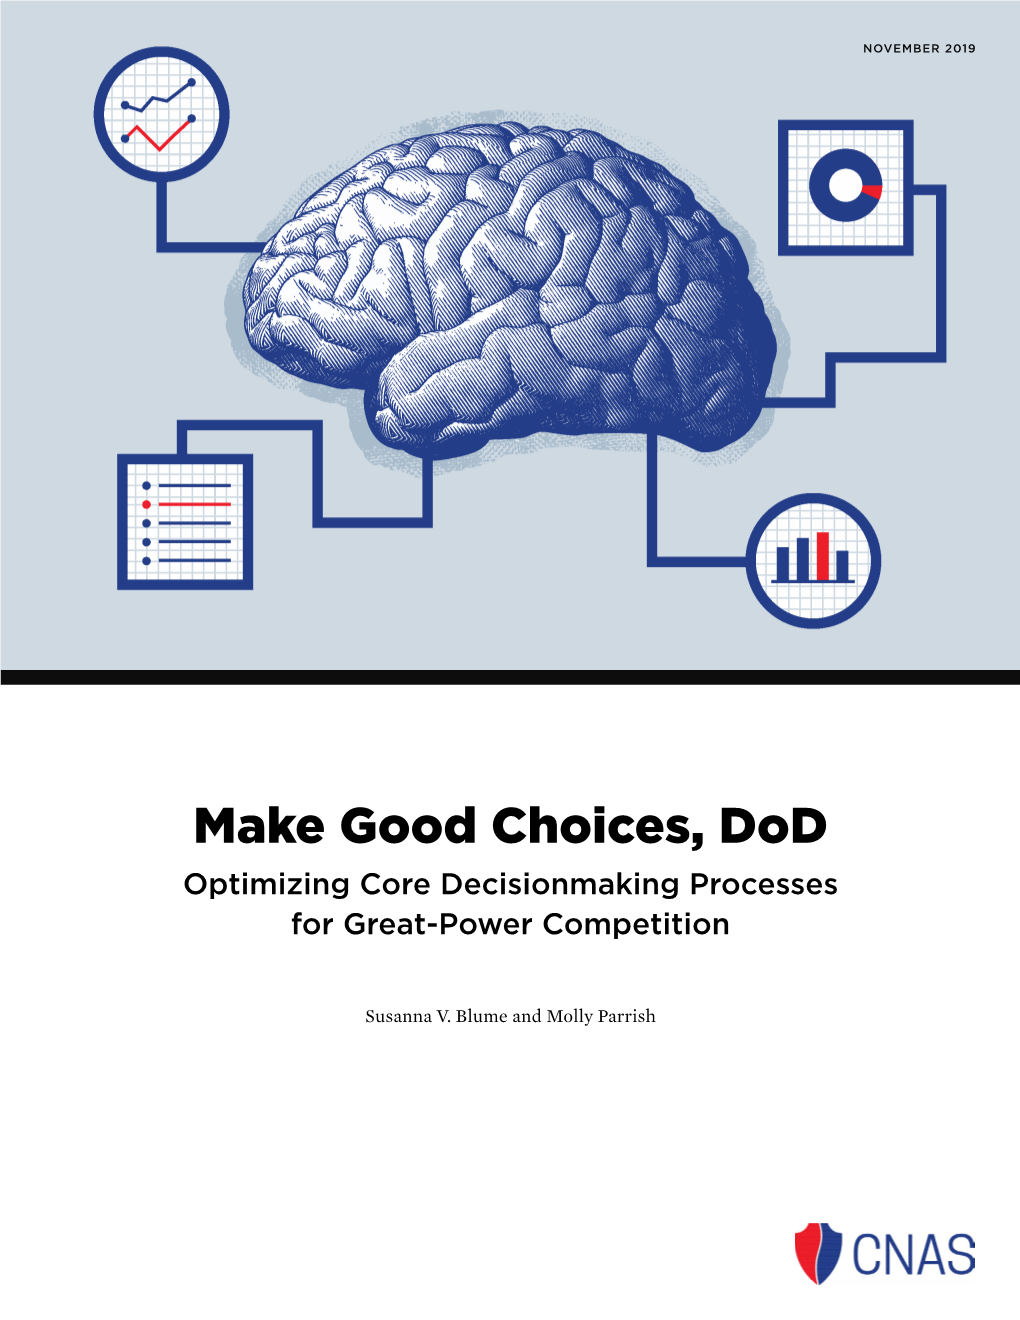 Make Good Choices, Dod Optimizing Core Decisionmaking Processes for Great-Power Competition